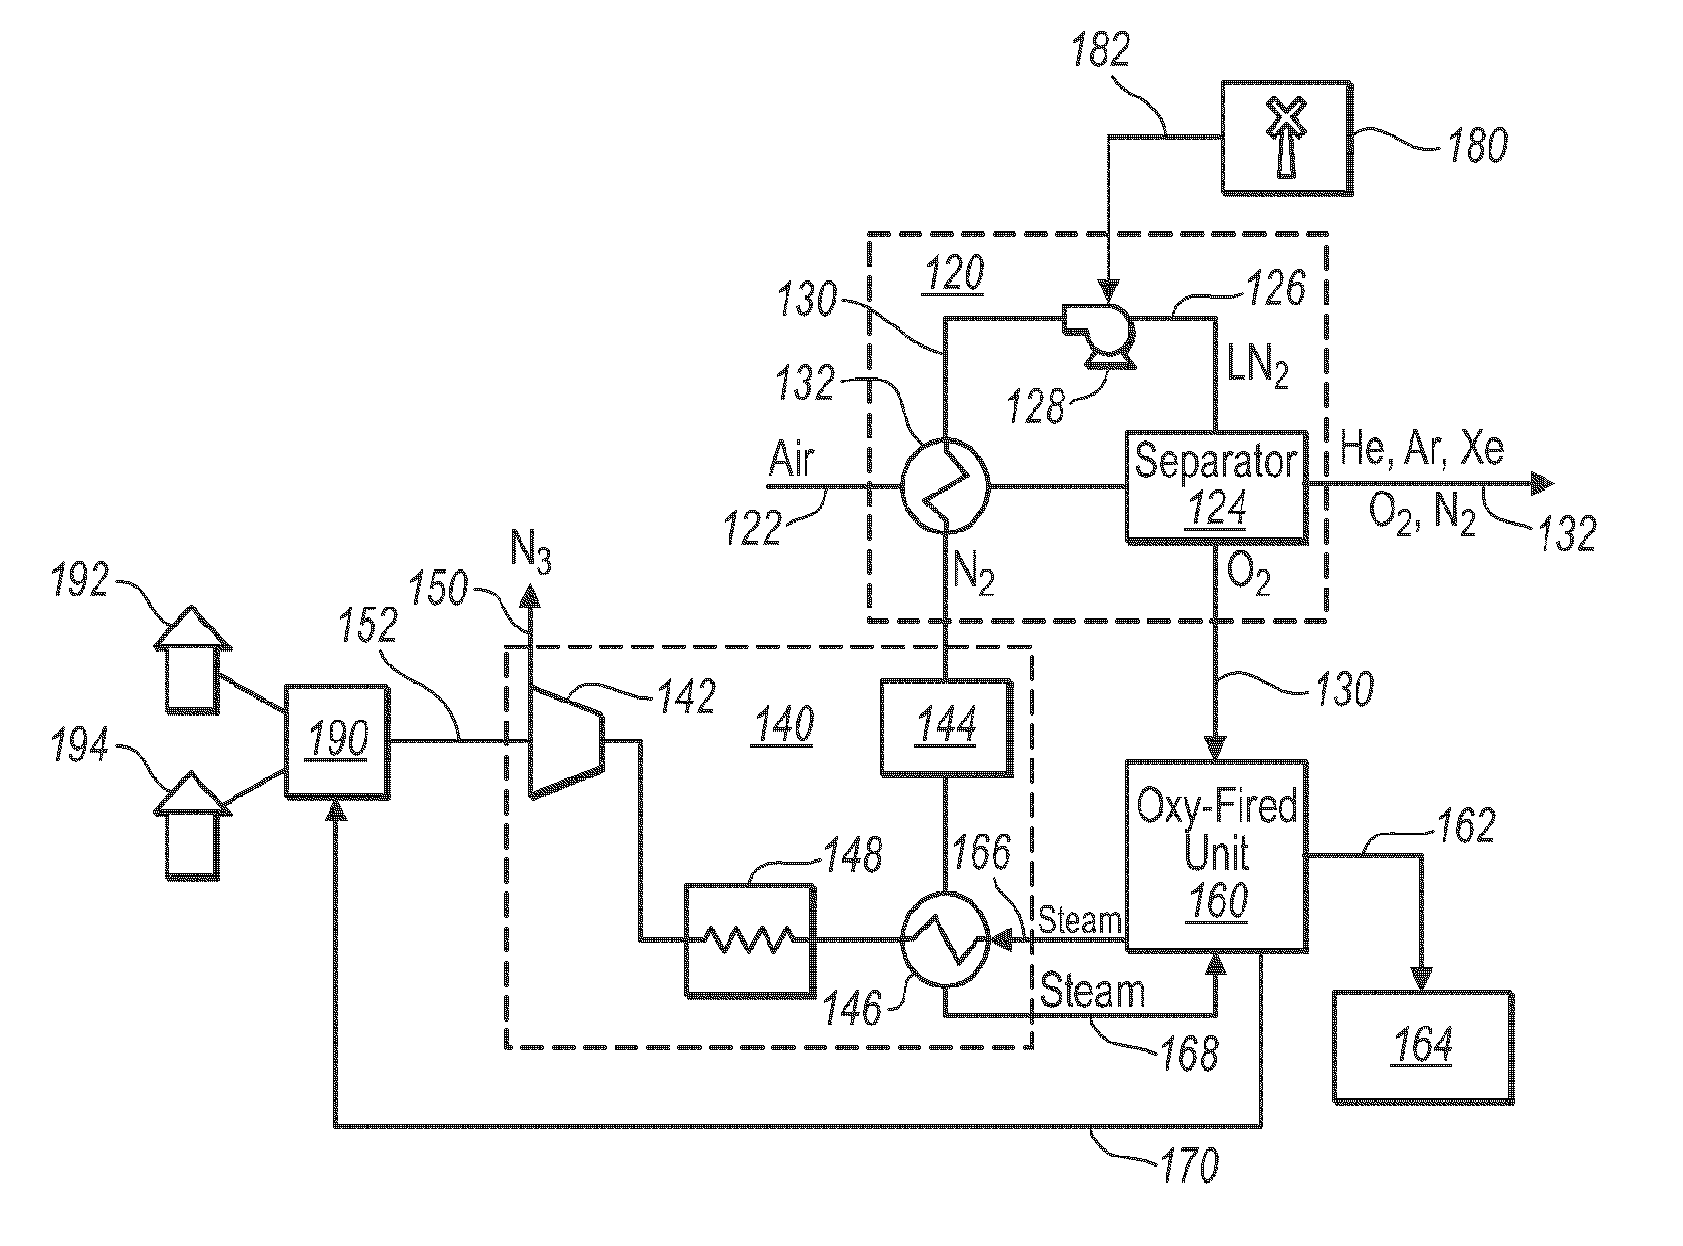 Methods and systems for generating power from a turbine using pressurized nitrogen